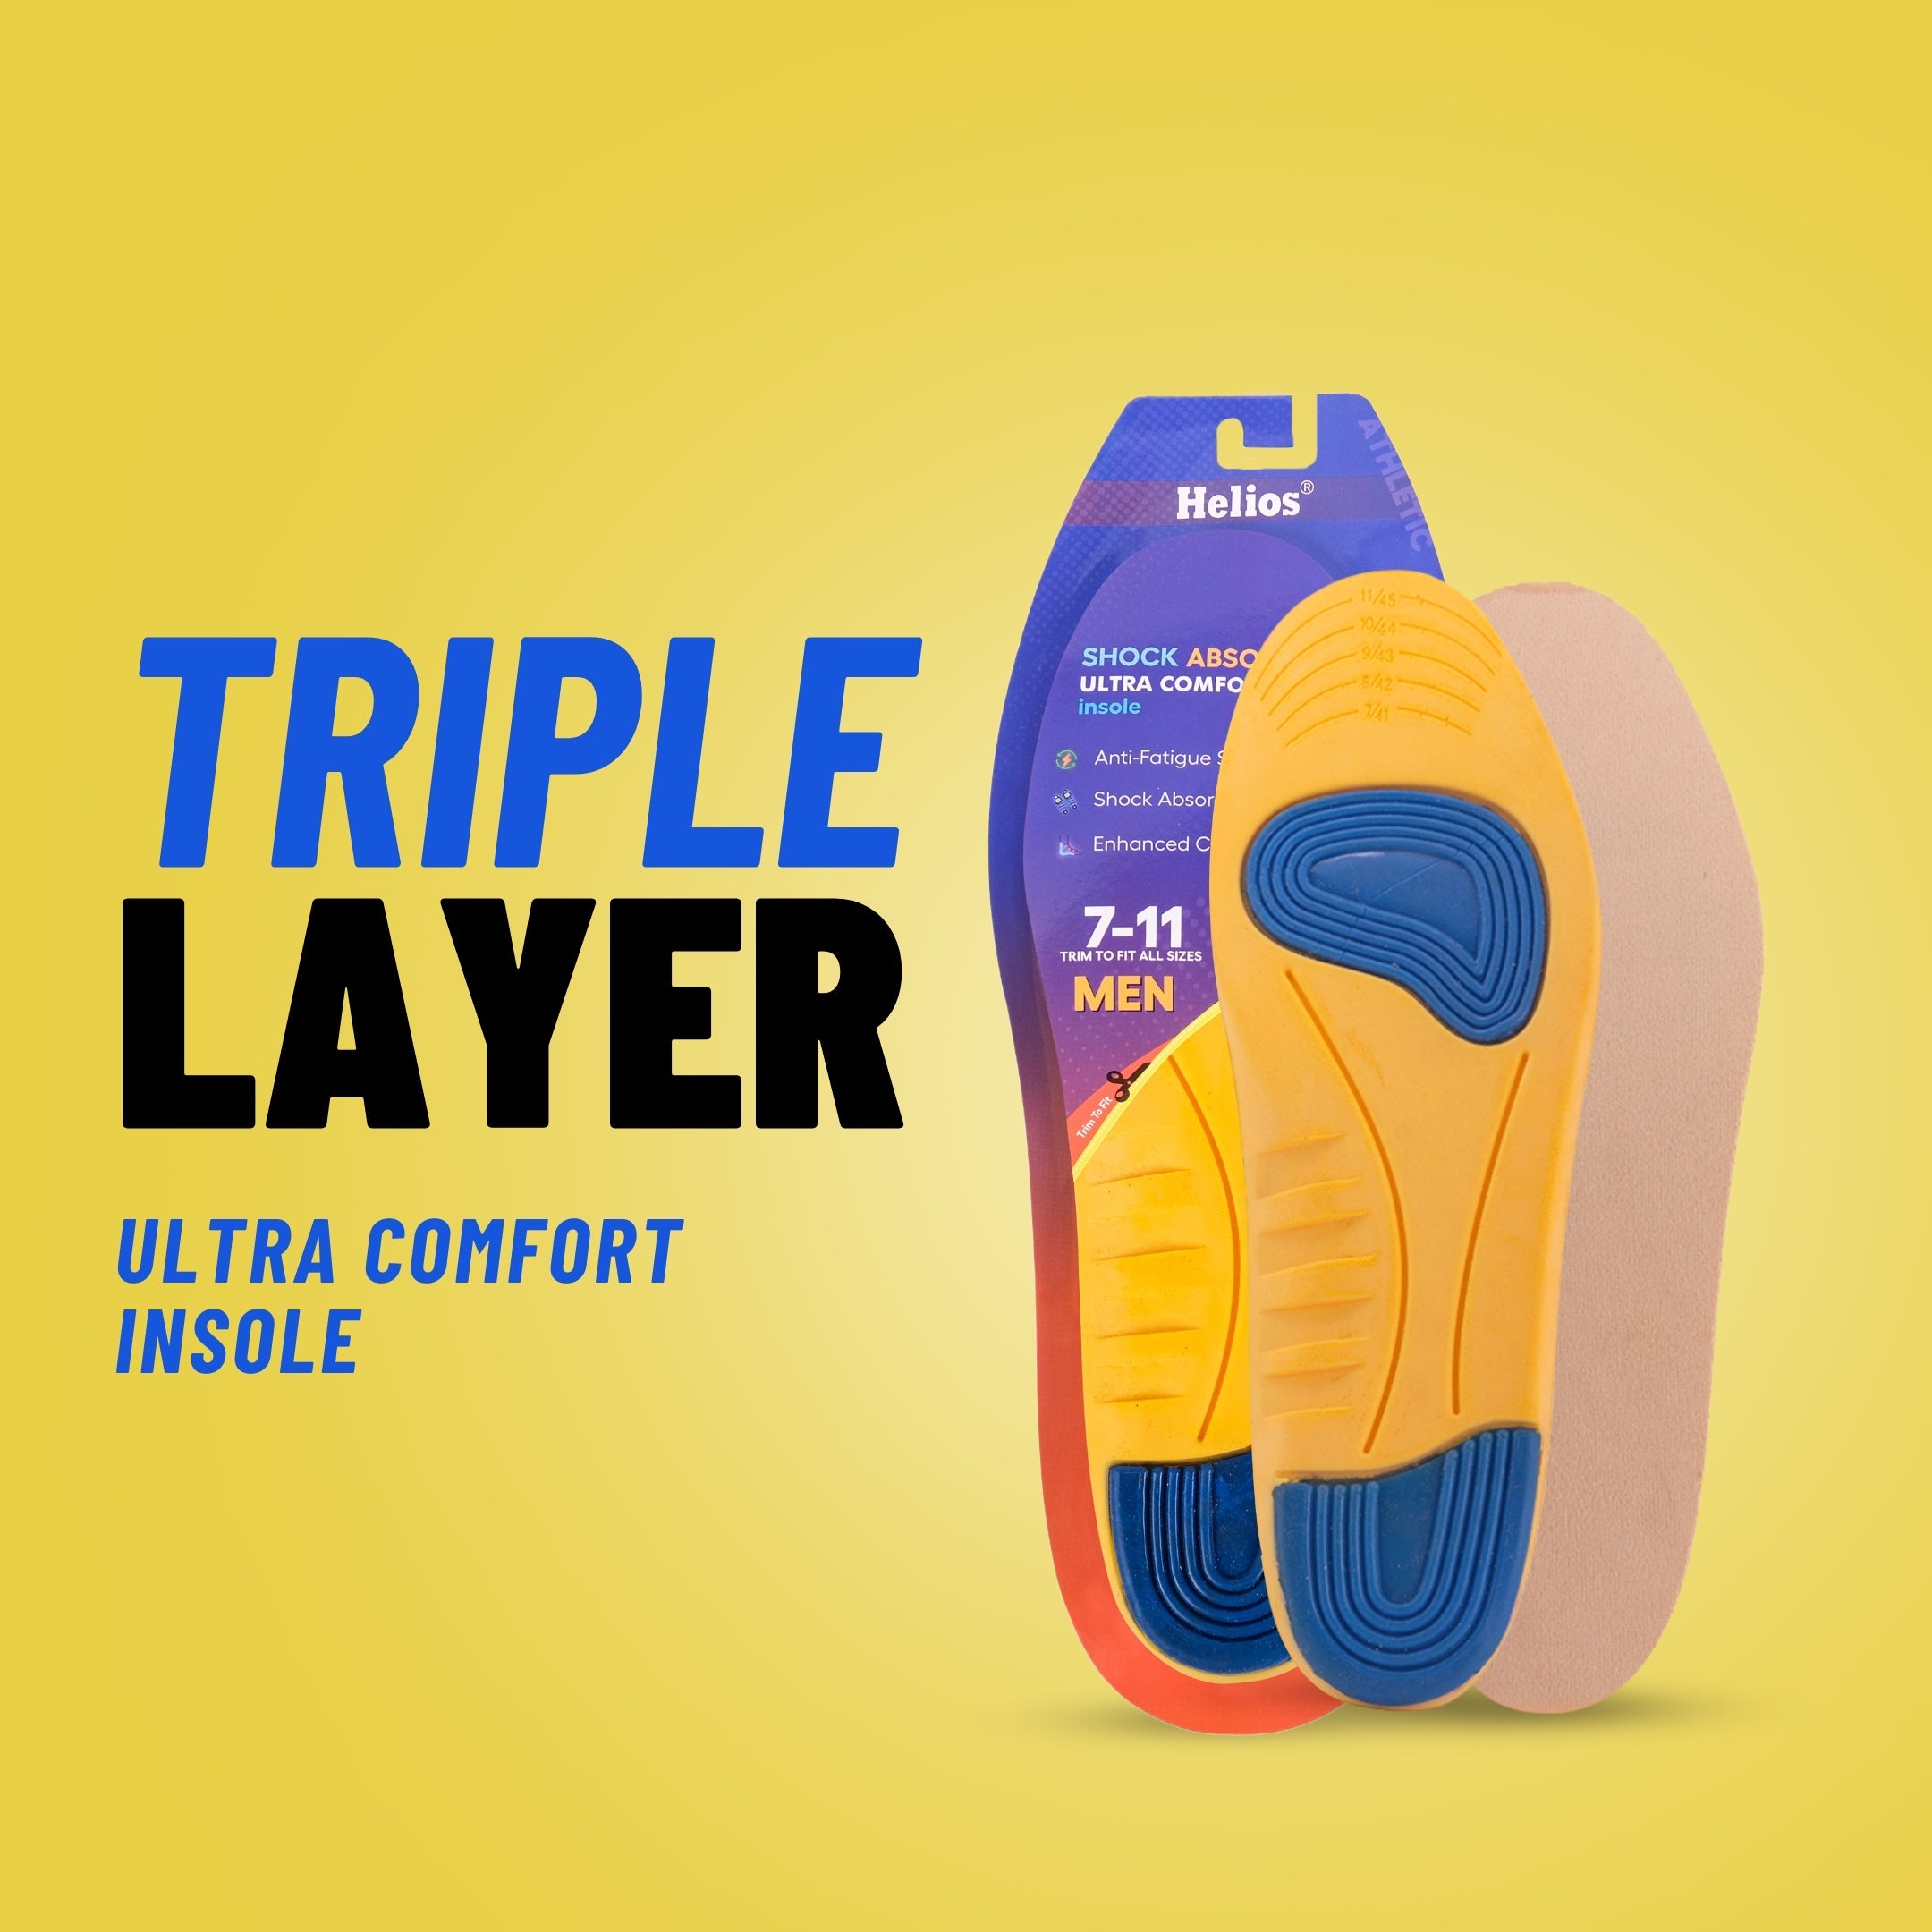 HELIOS TRIPLE LAYER ULTRA COMFORT INSOLES FOR PAIN RELIEF & SHOCK ABSORPTION